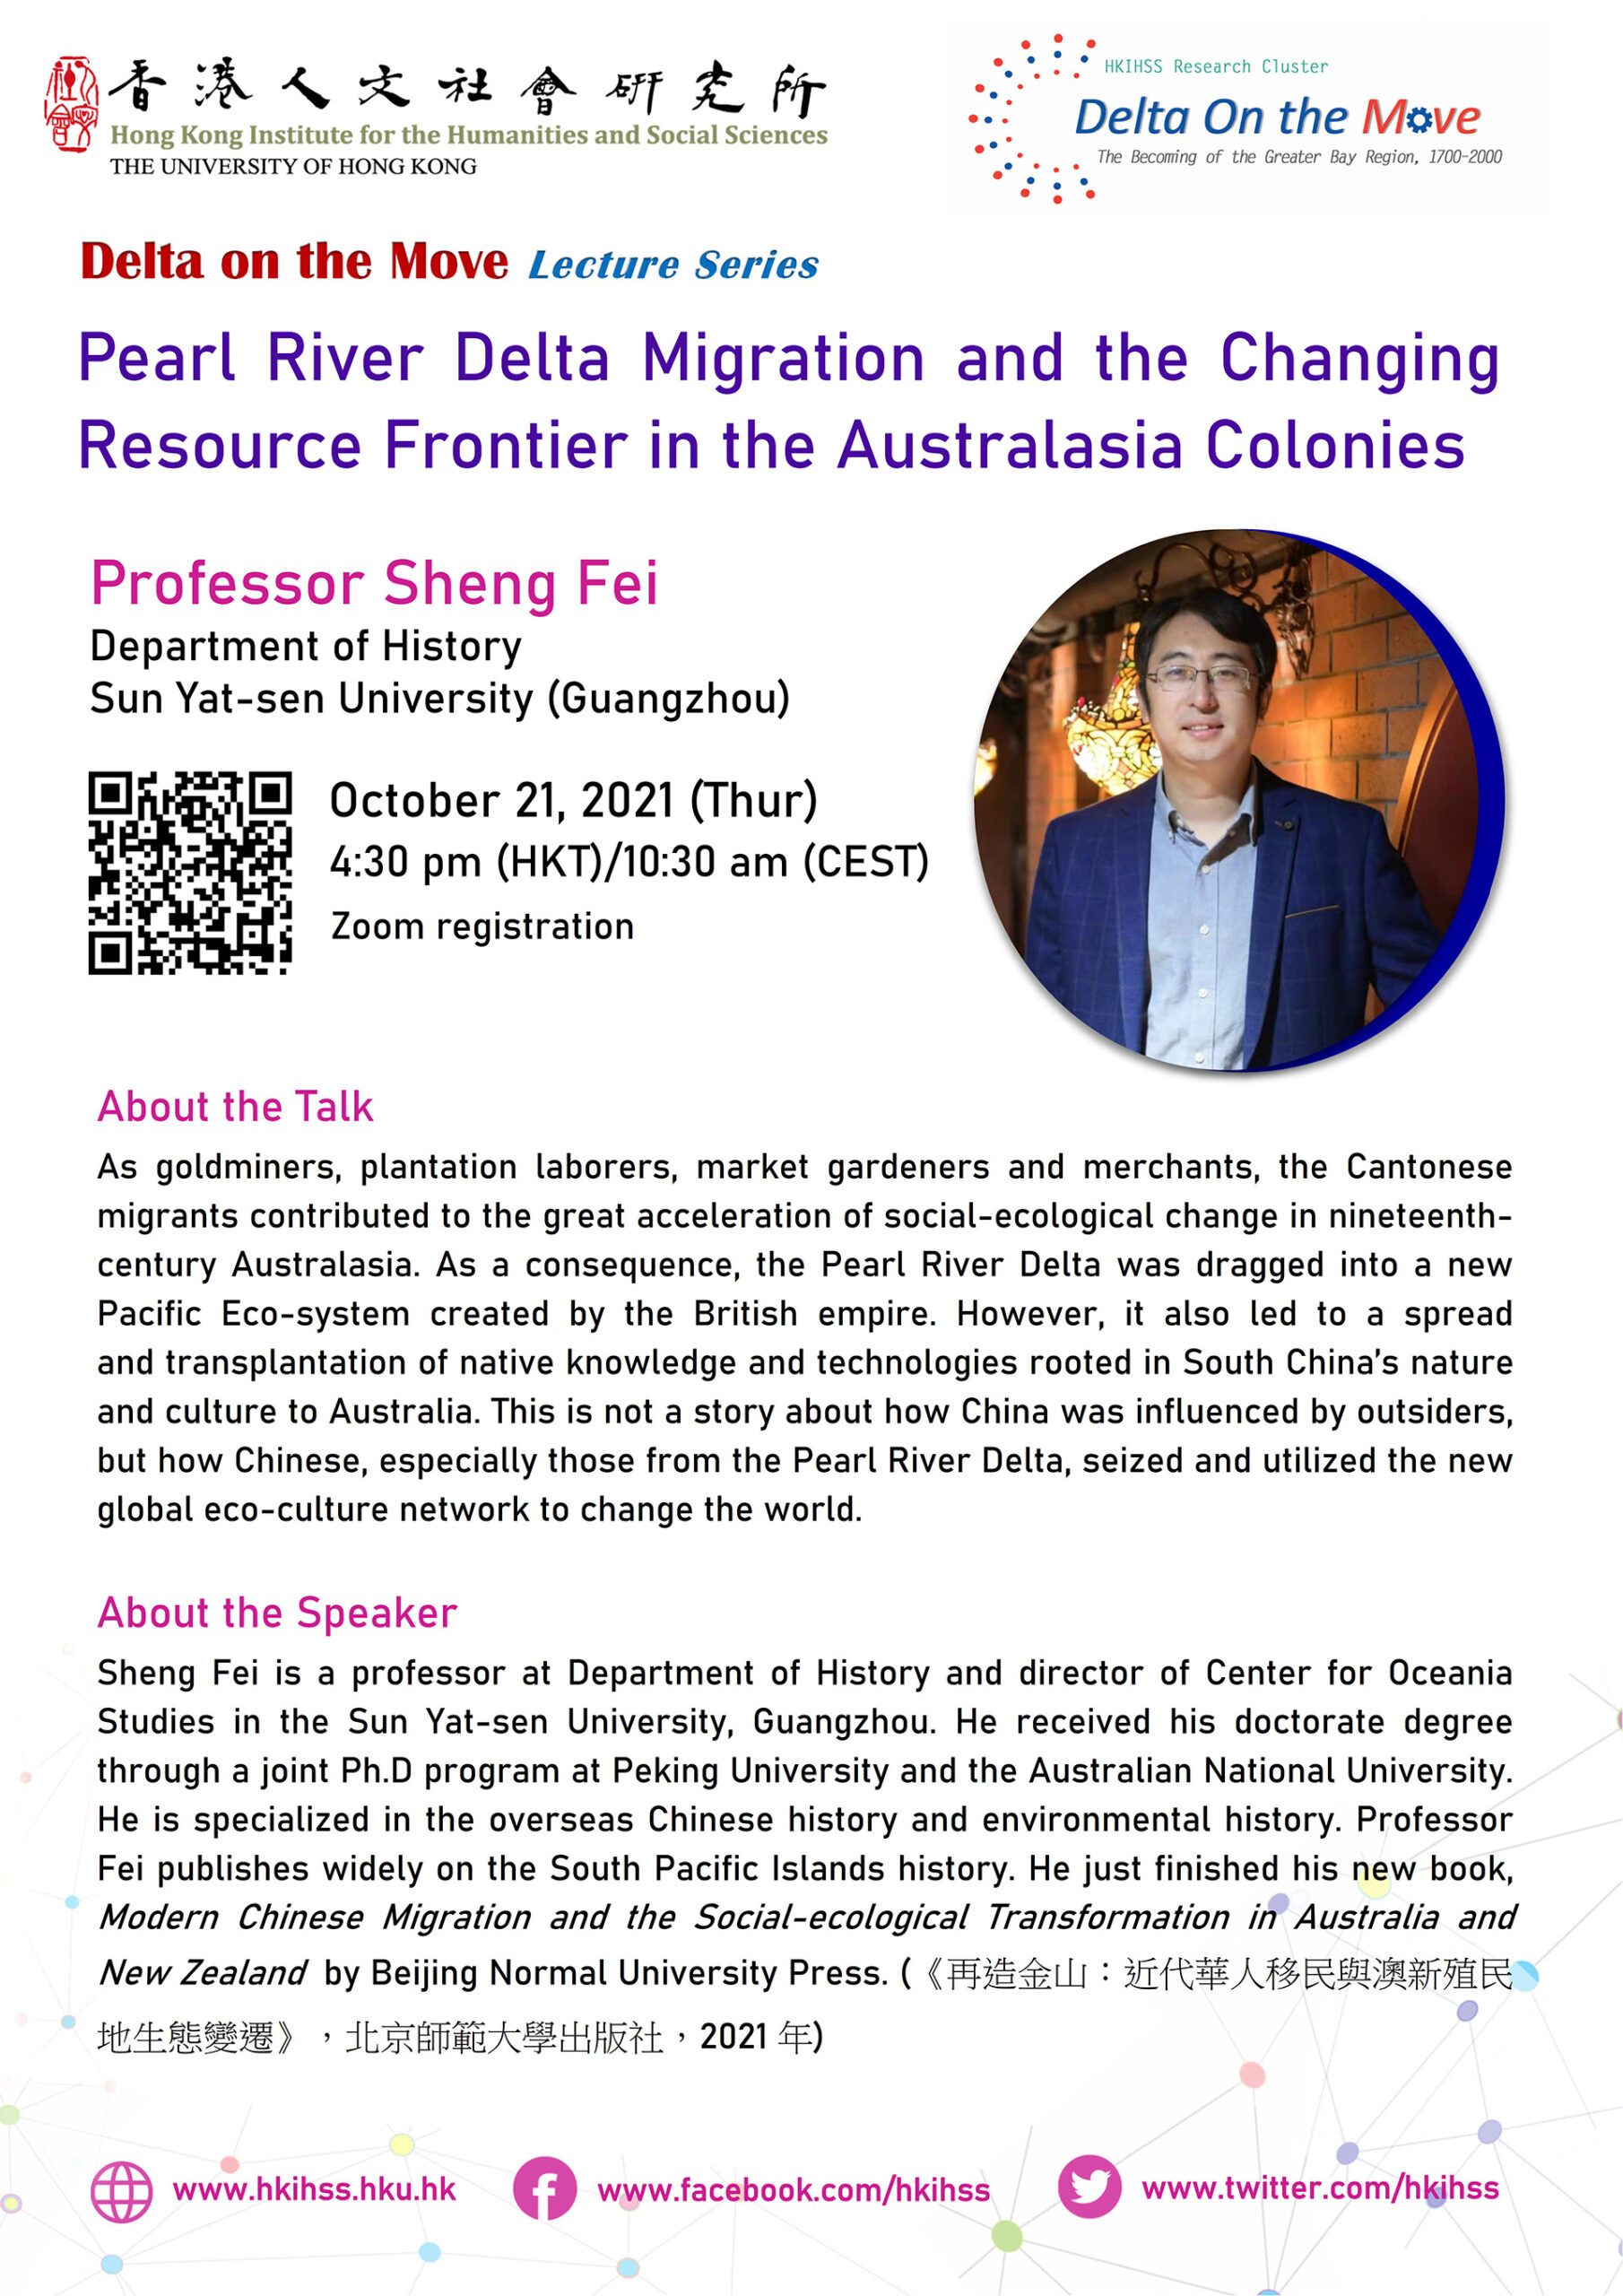 Delta on the Move Lecture Series “Pearl River Delta Migration and the Changing Resource Frontier in the Australasia Colonies